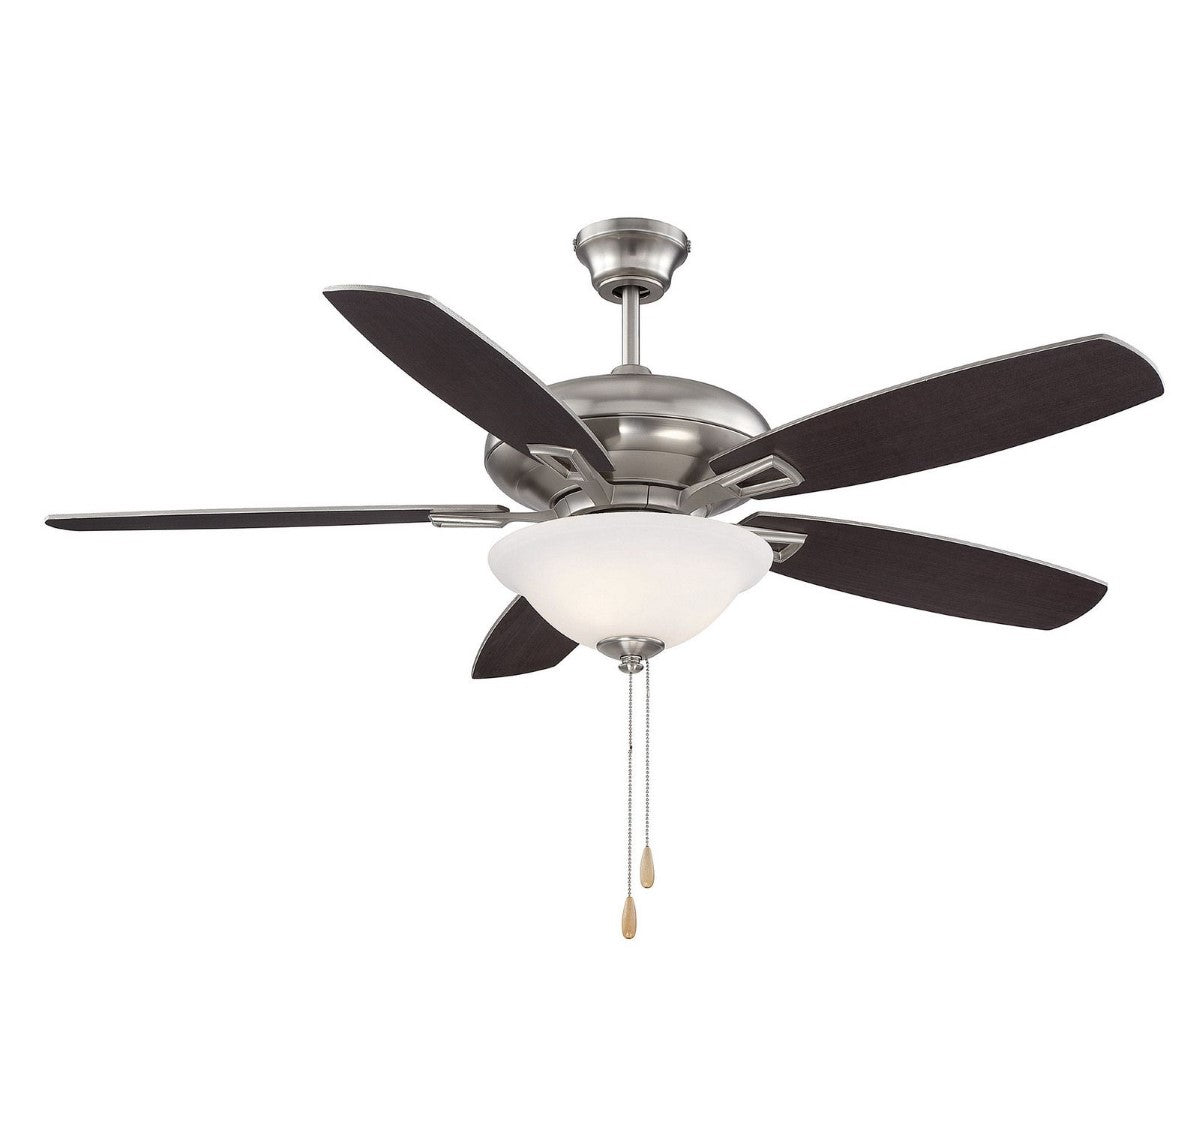 Mystique 52 Inch Satin Nickel Ceiling Fan With Light, 5 Chestnut/Silver Reversible Blades - Bees Lighting